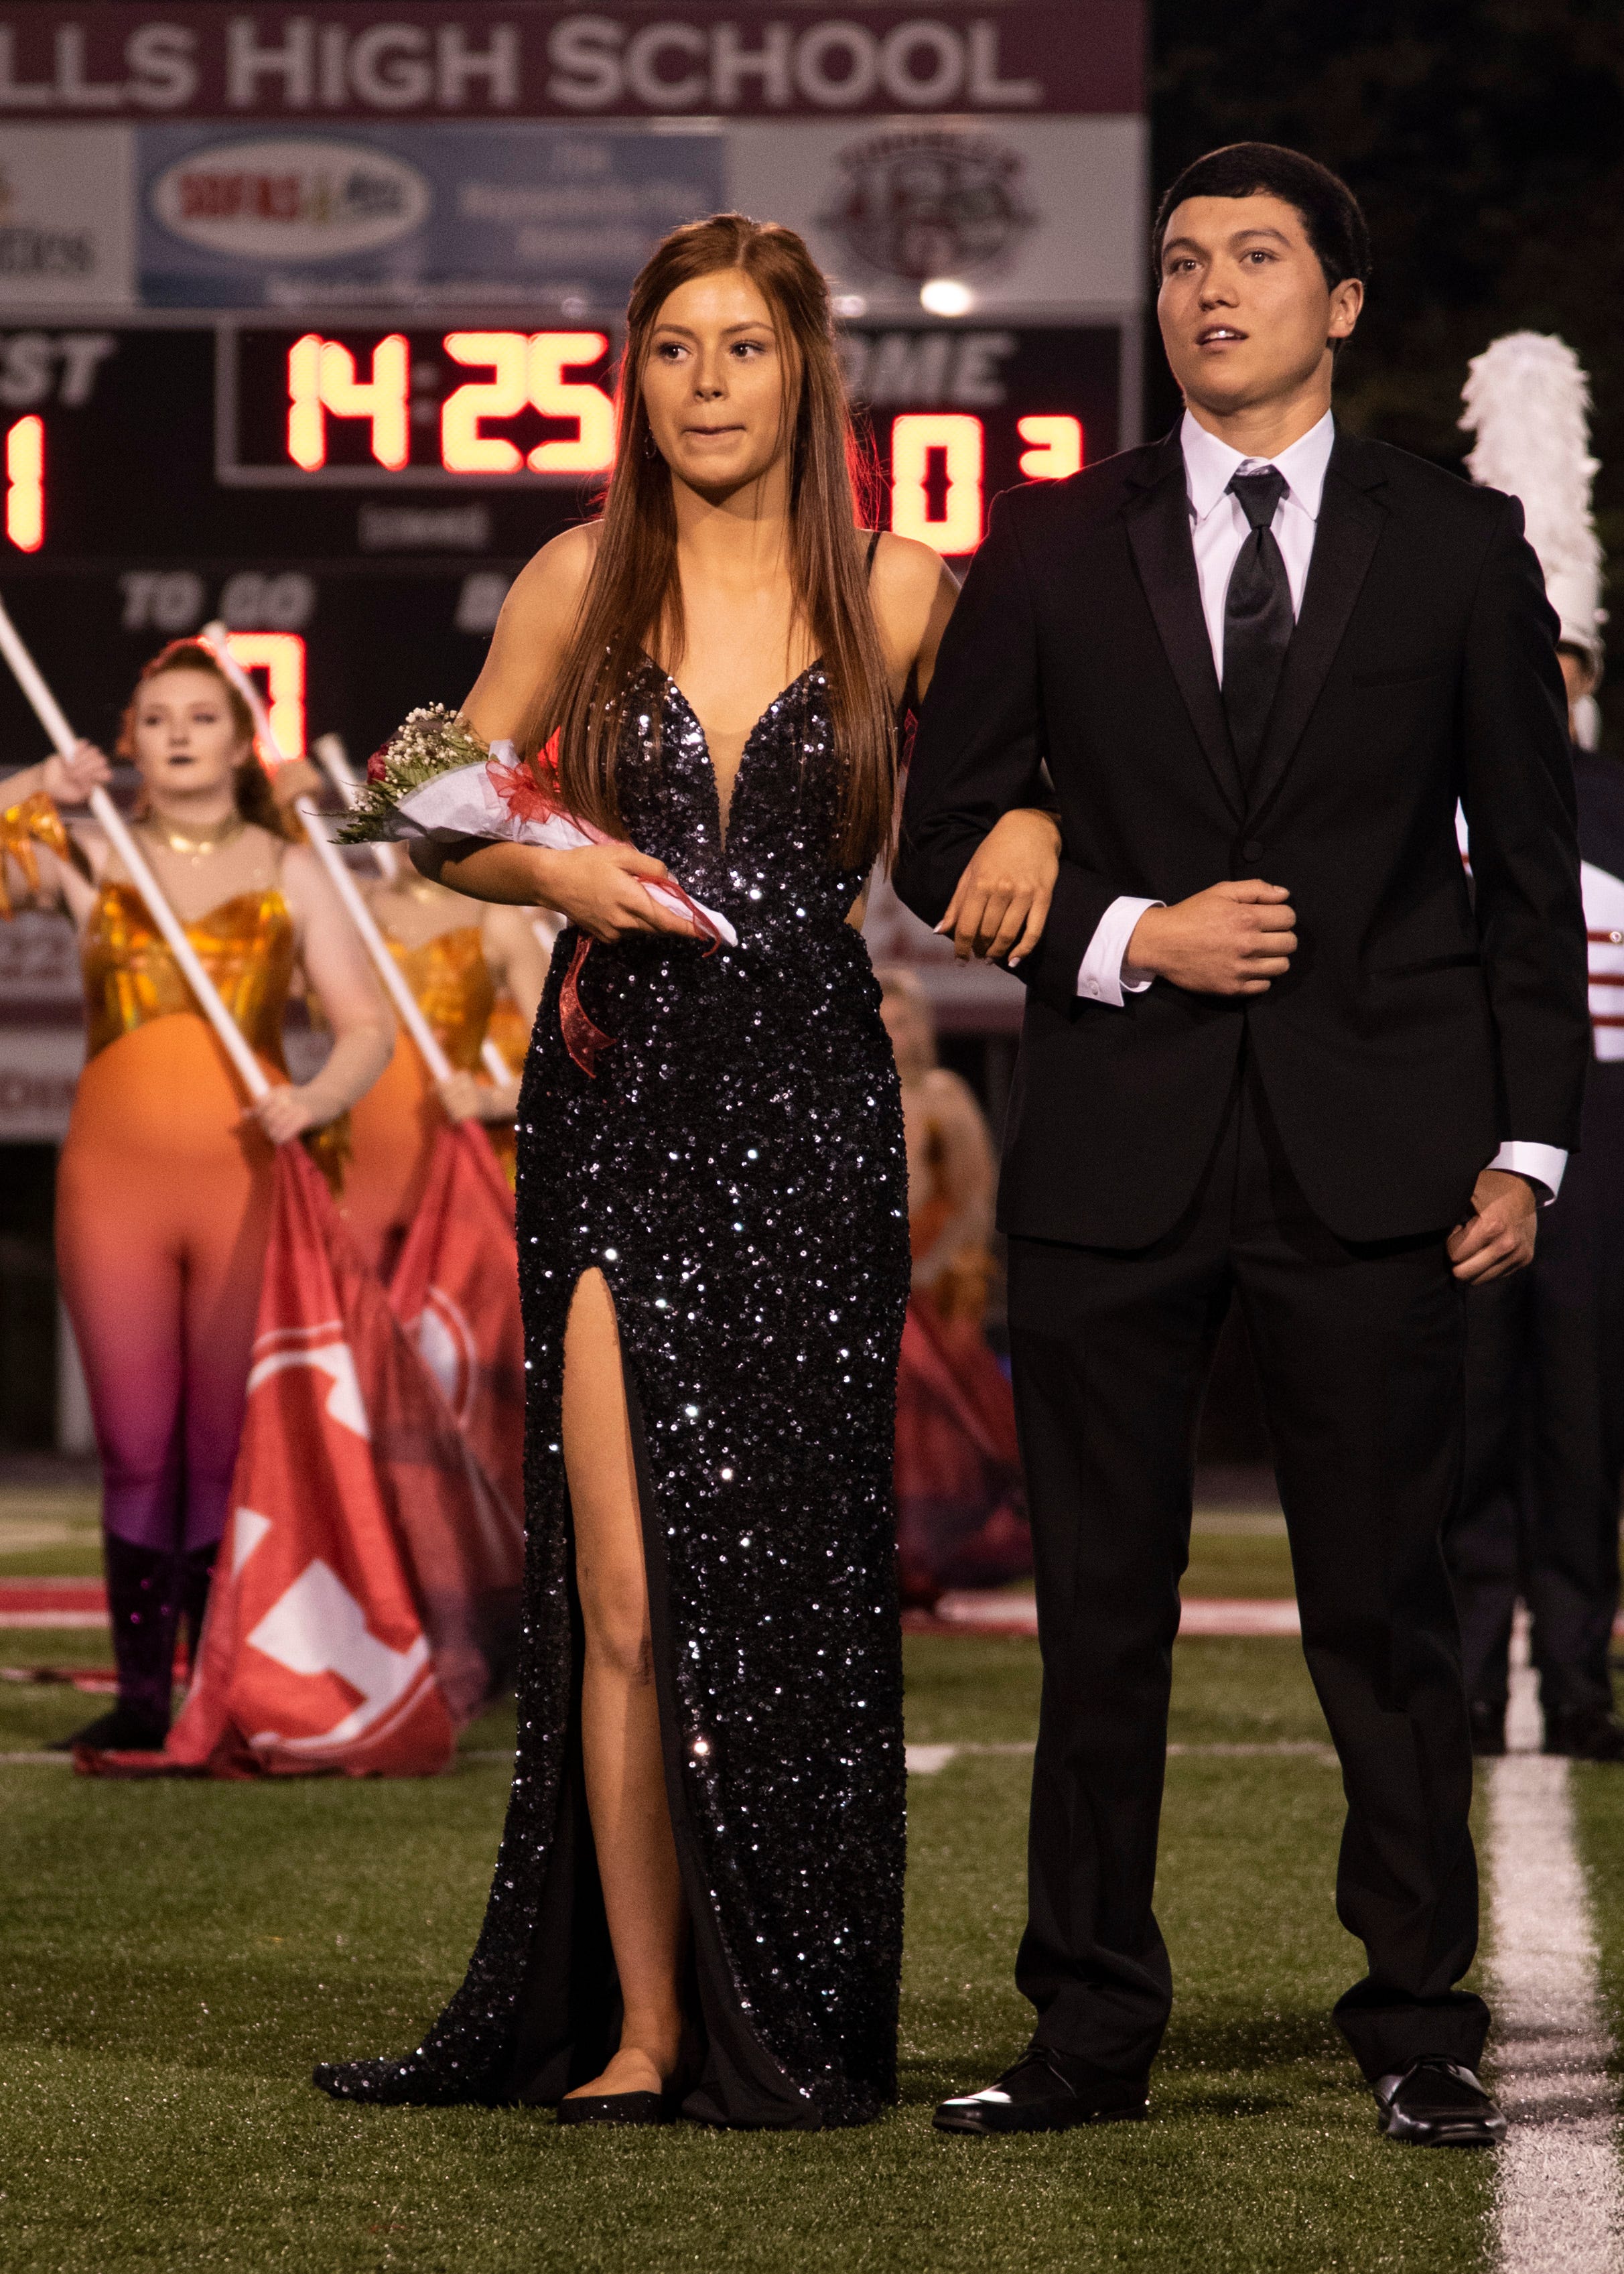 A Halls homecoming court member during the Halls and Central high school football game Friday, Oct. 4, 2019, at Halls High School.